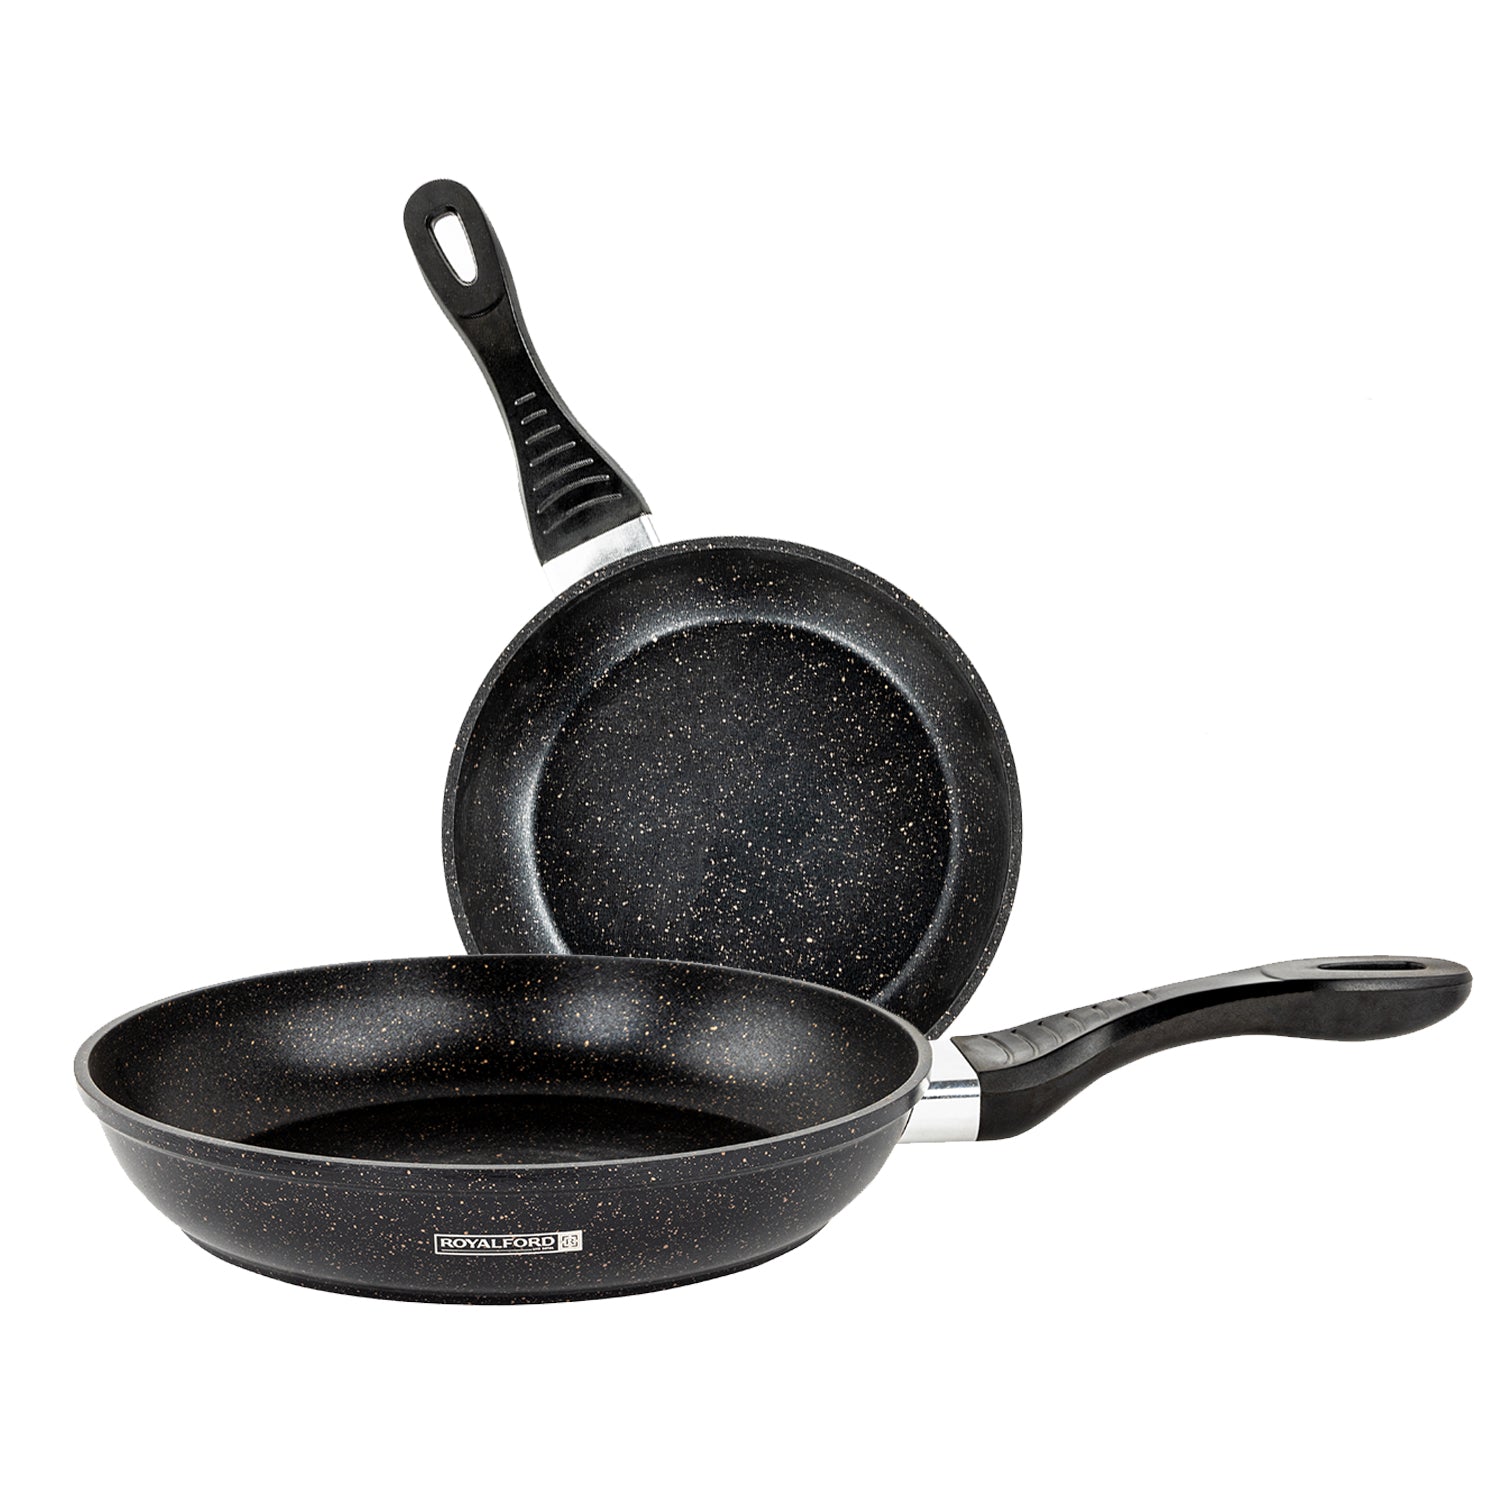 Marble Black Frying Pan Set (2 Piece) By Royalford Royalford 